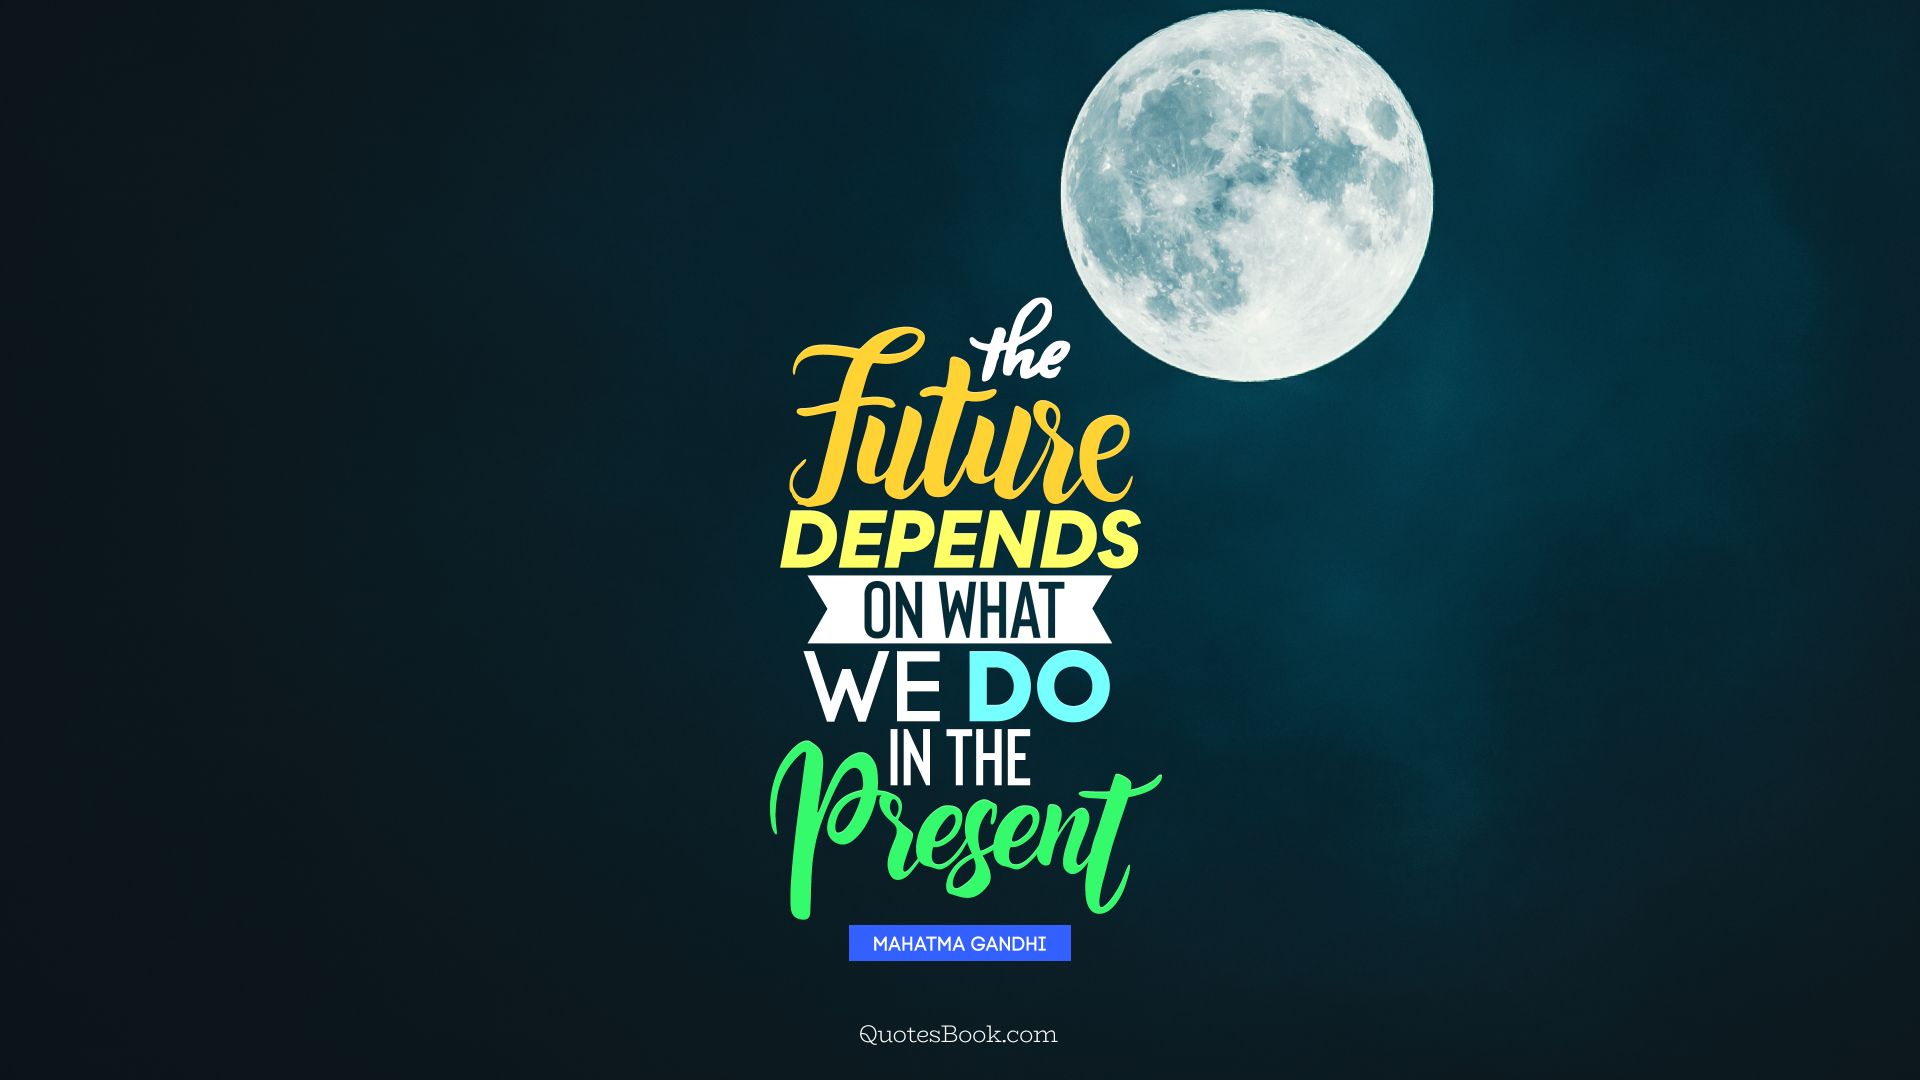 The future depends on what we do in the present. - Quote by Mahatma Gandhi